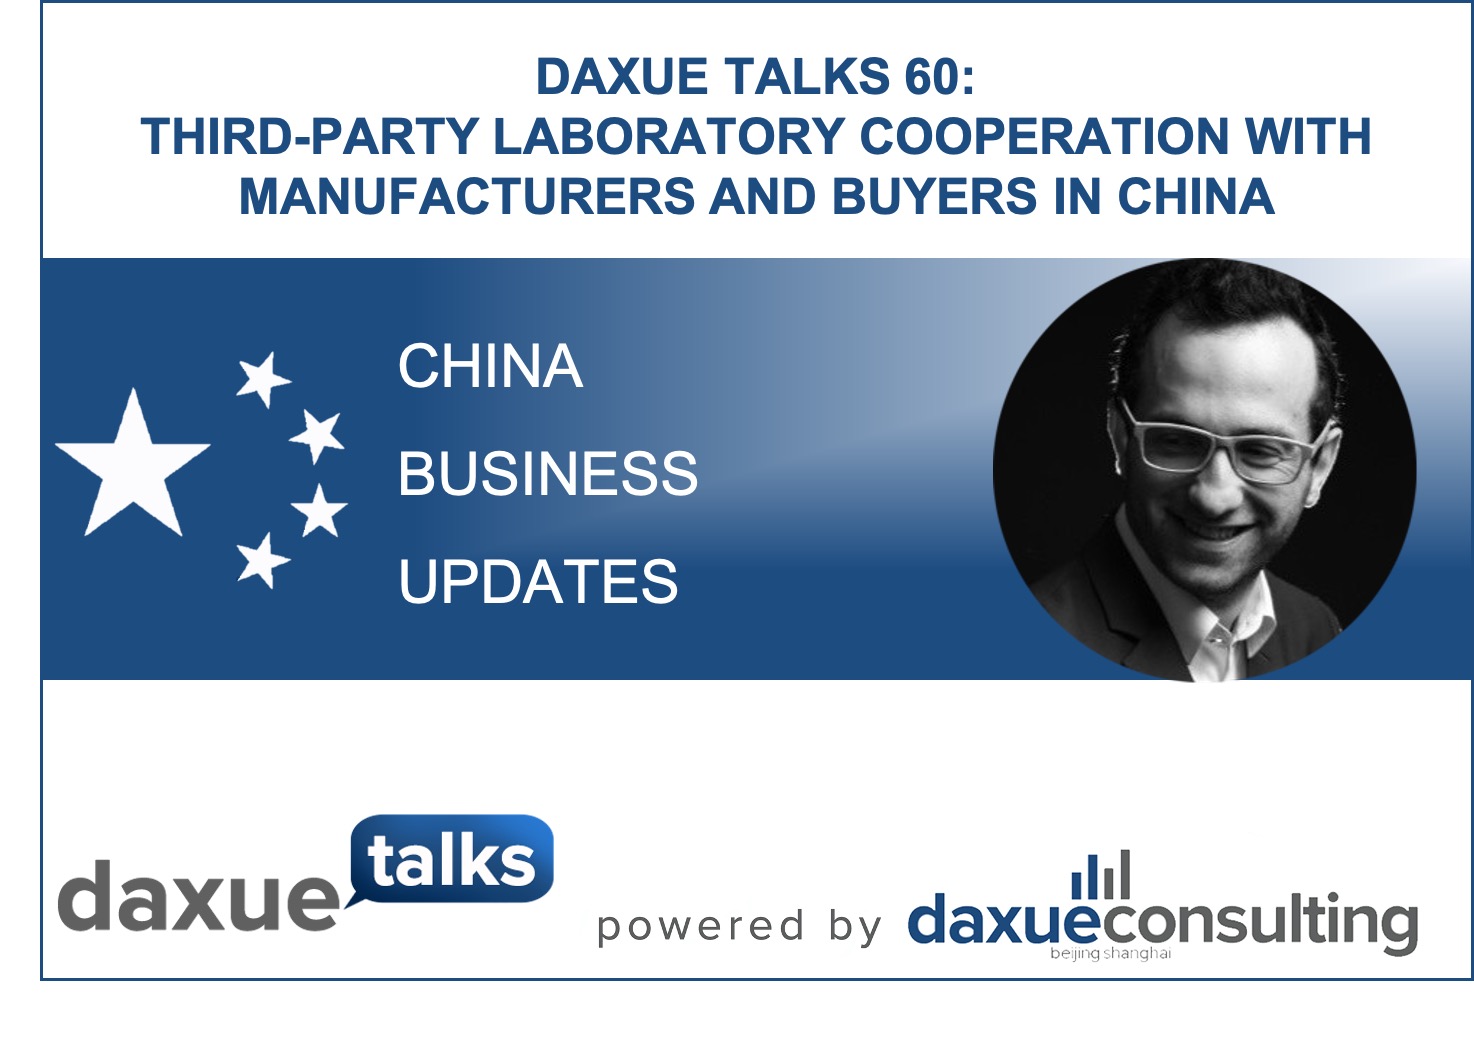 Daxue Talks 60: Third-party laboratory cooperation with manufacturers and buyers in China